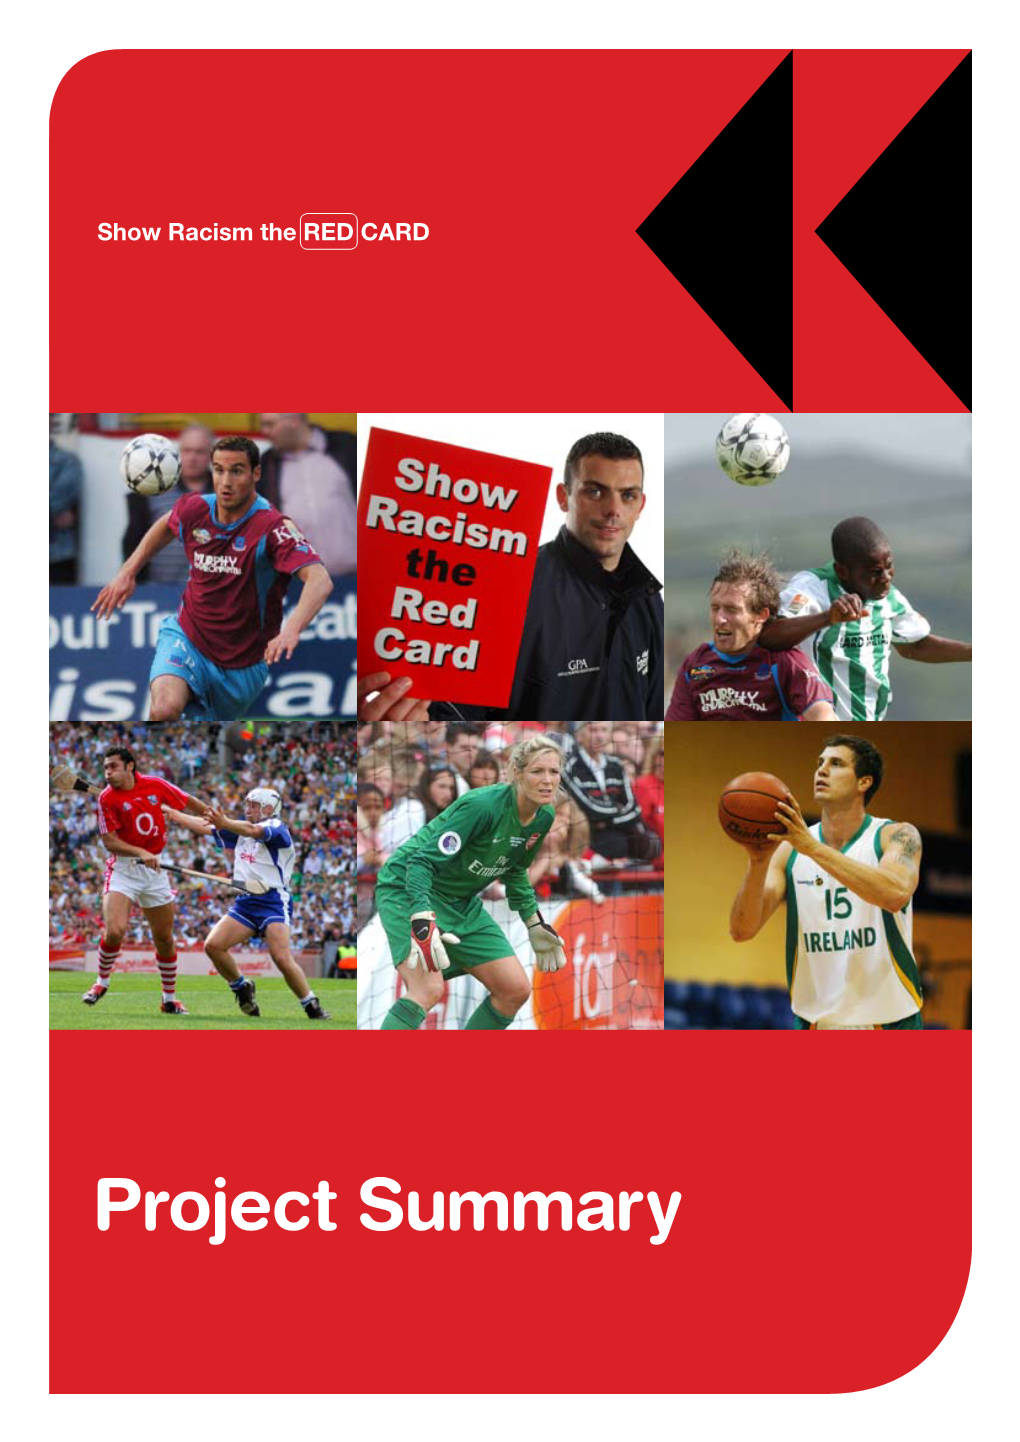 Project Summary Introduction Welcome to the Project Summary of Show Racism the Red Card